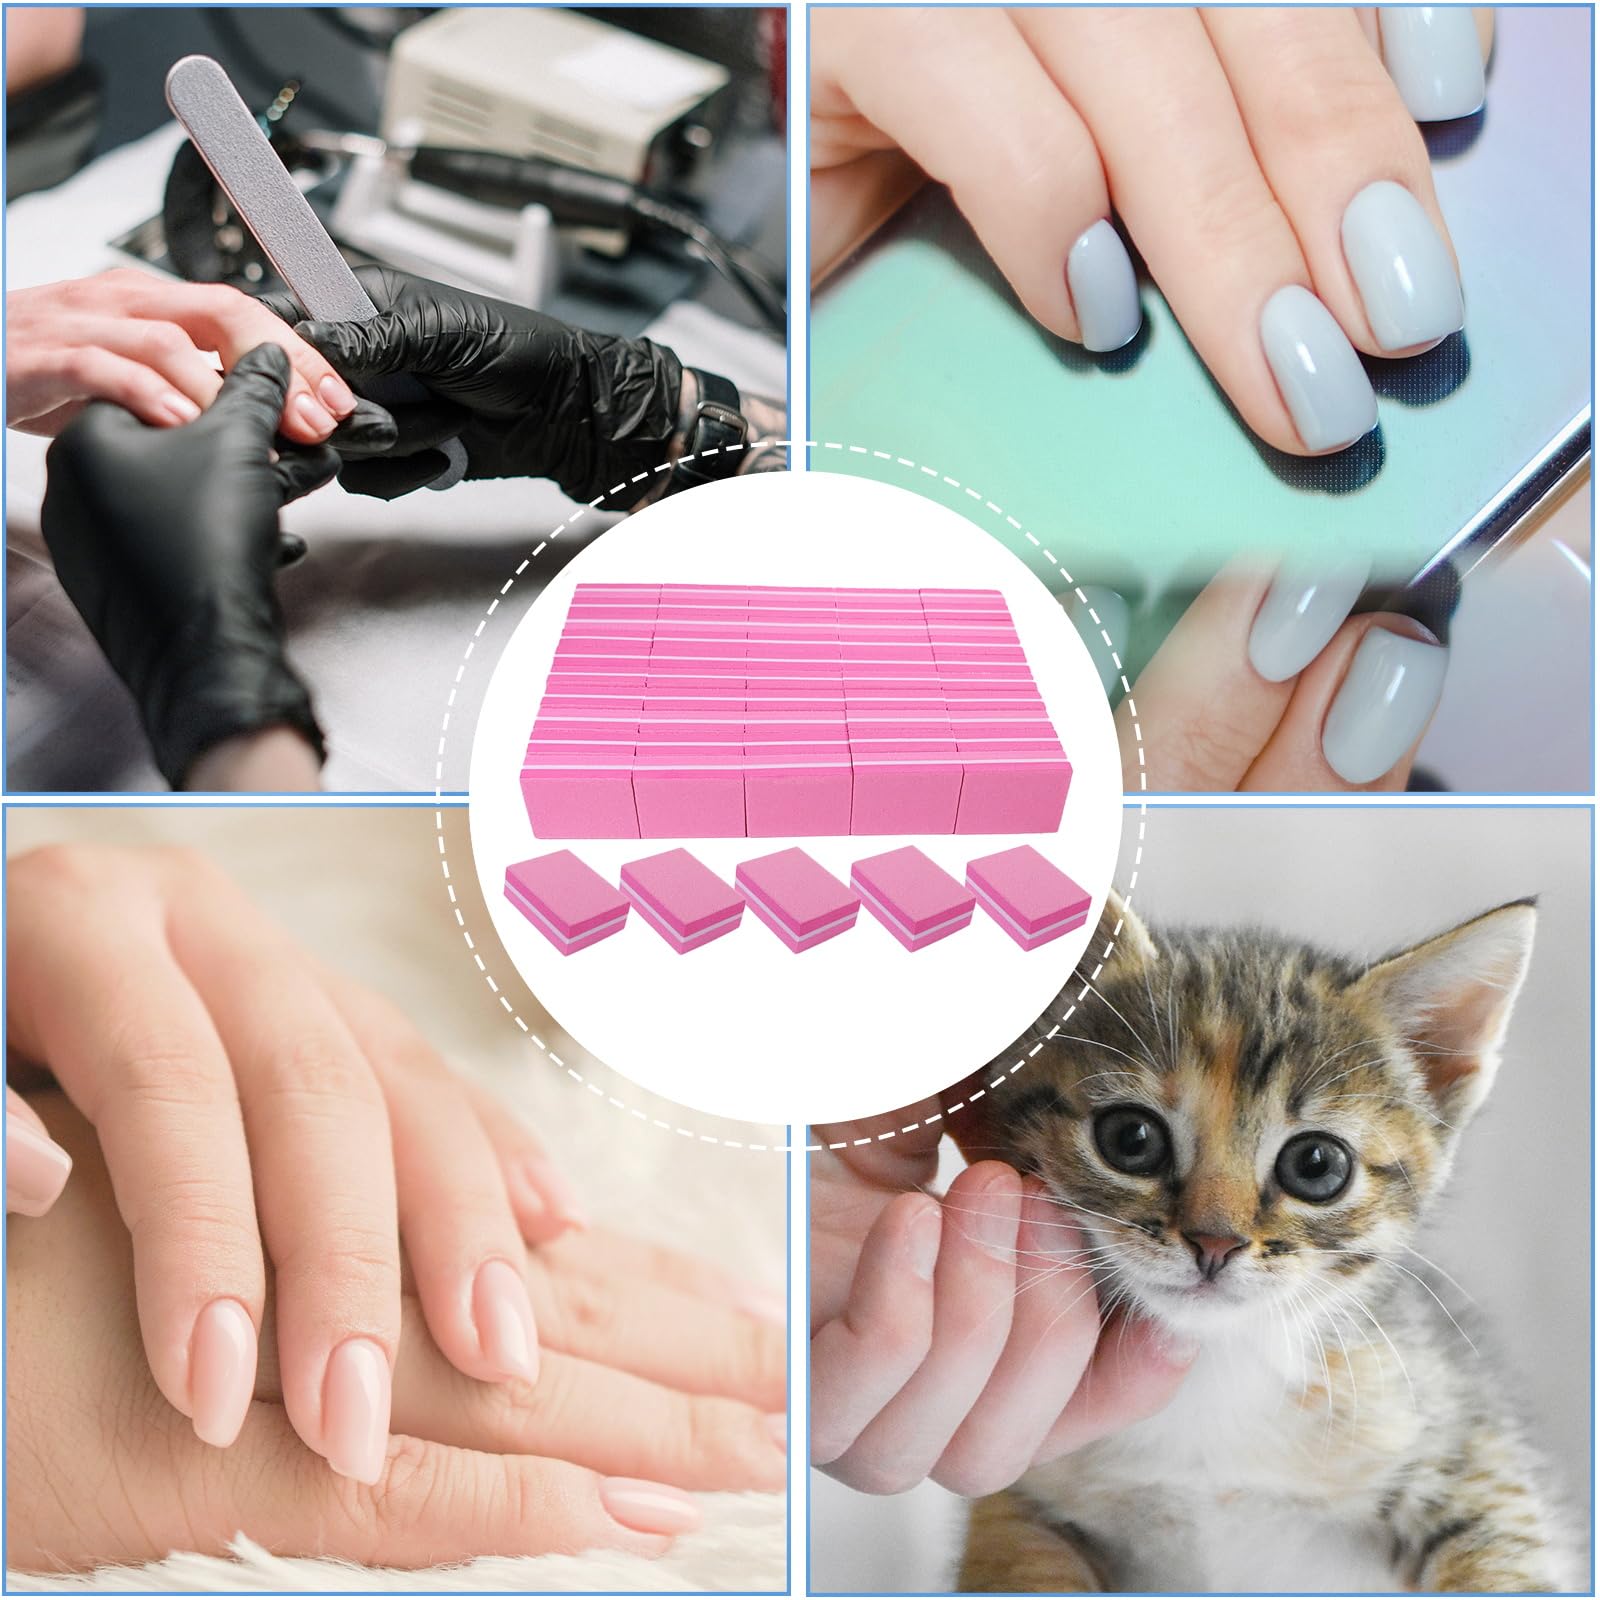 How to Use a Nail Buffer: 5 Steps